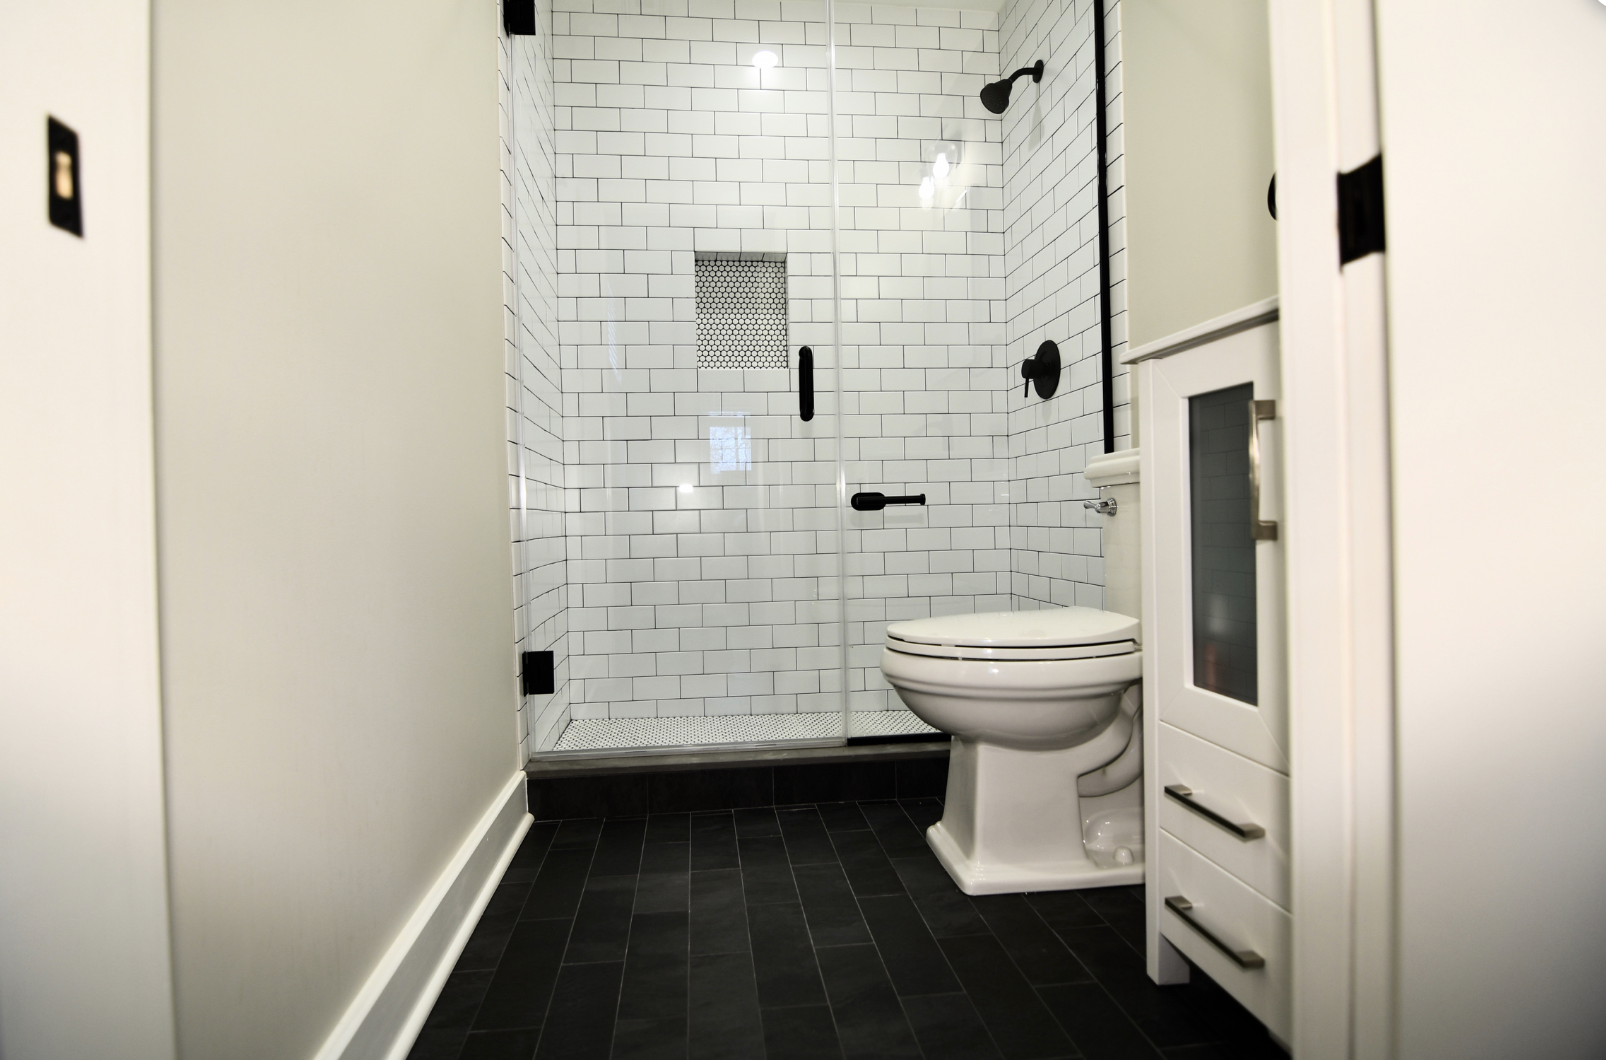 How to Attain the Luxury Bathroom Remodel You’ve Always Wanted